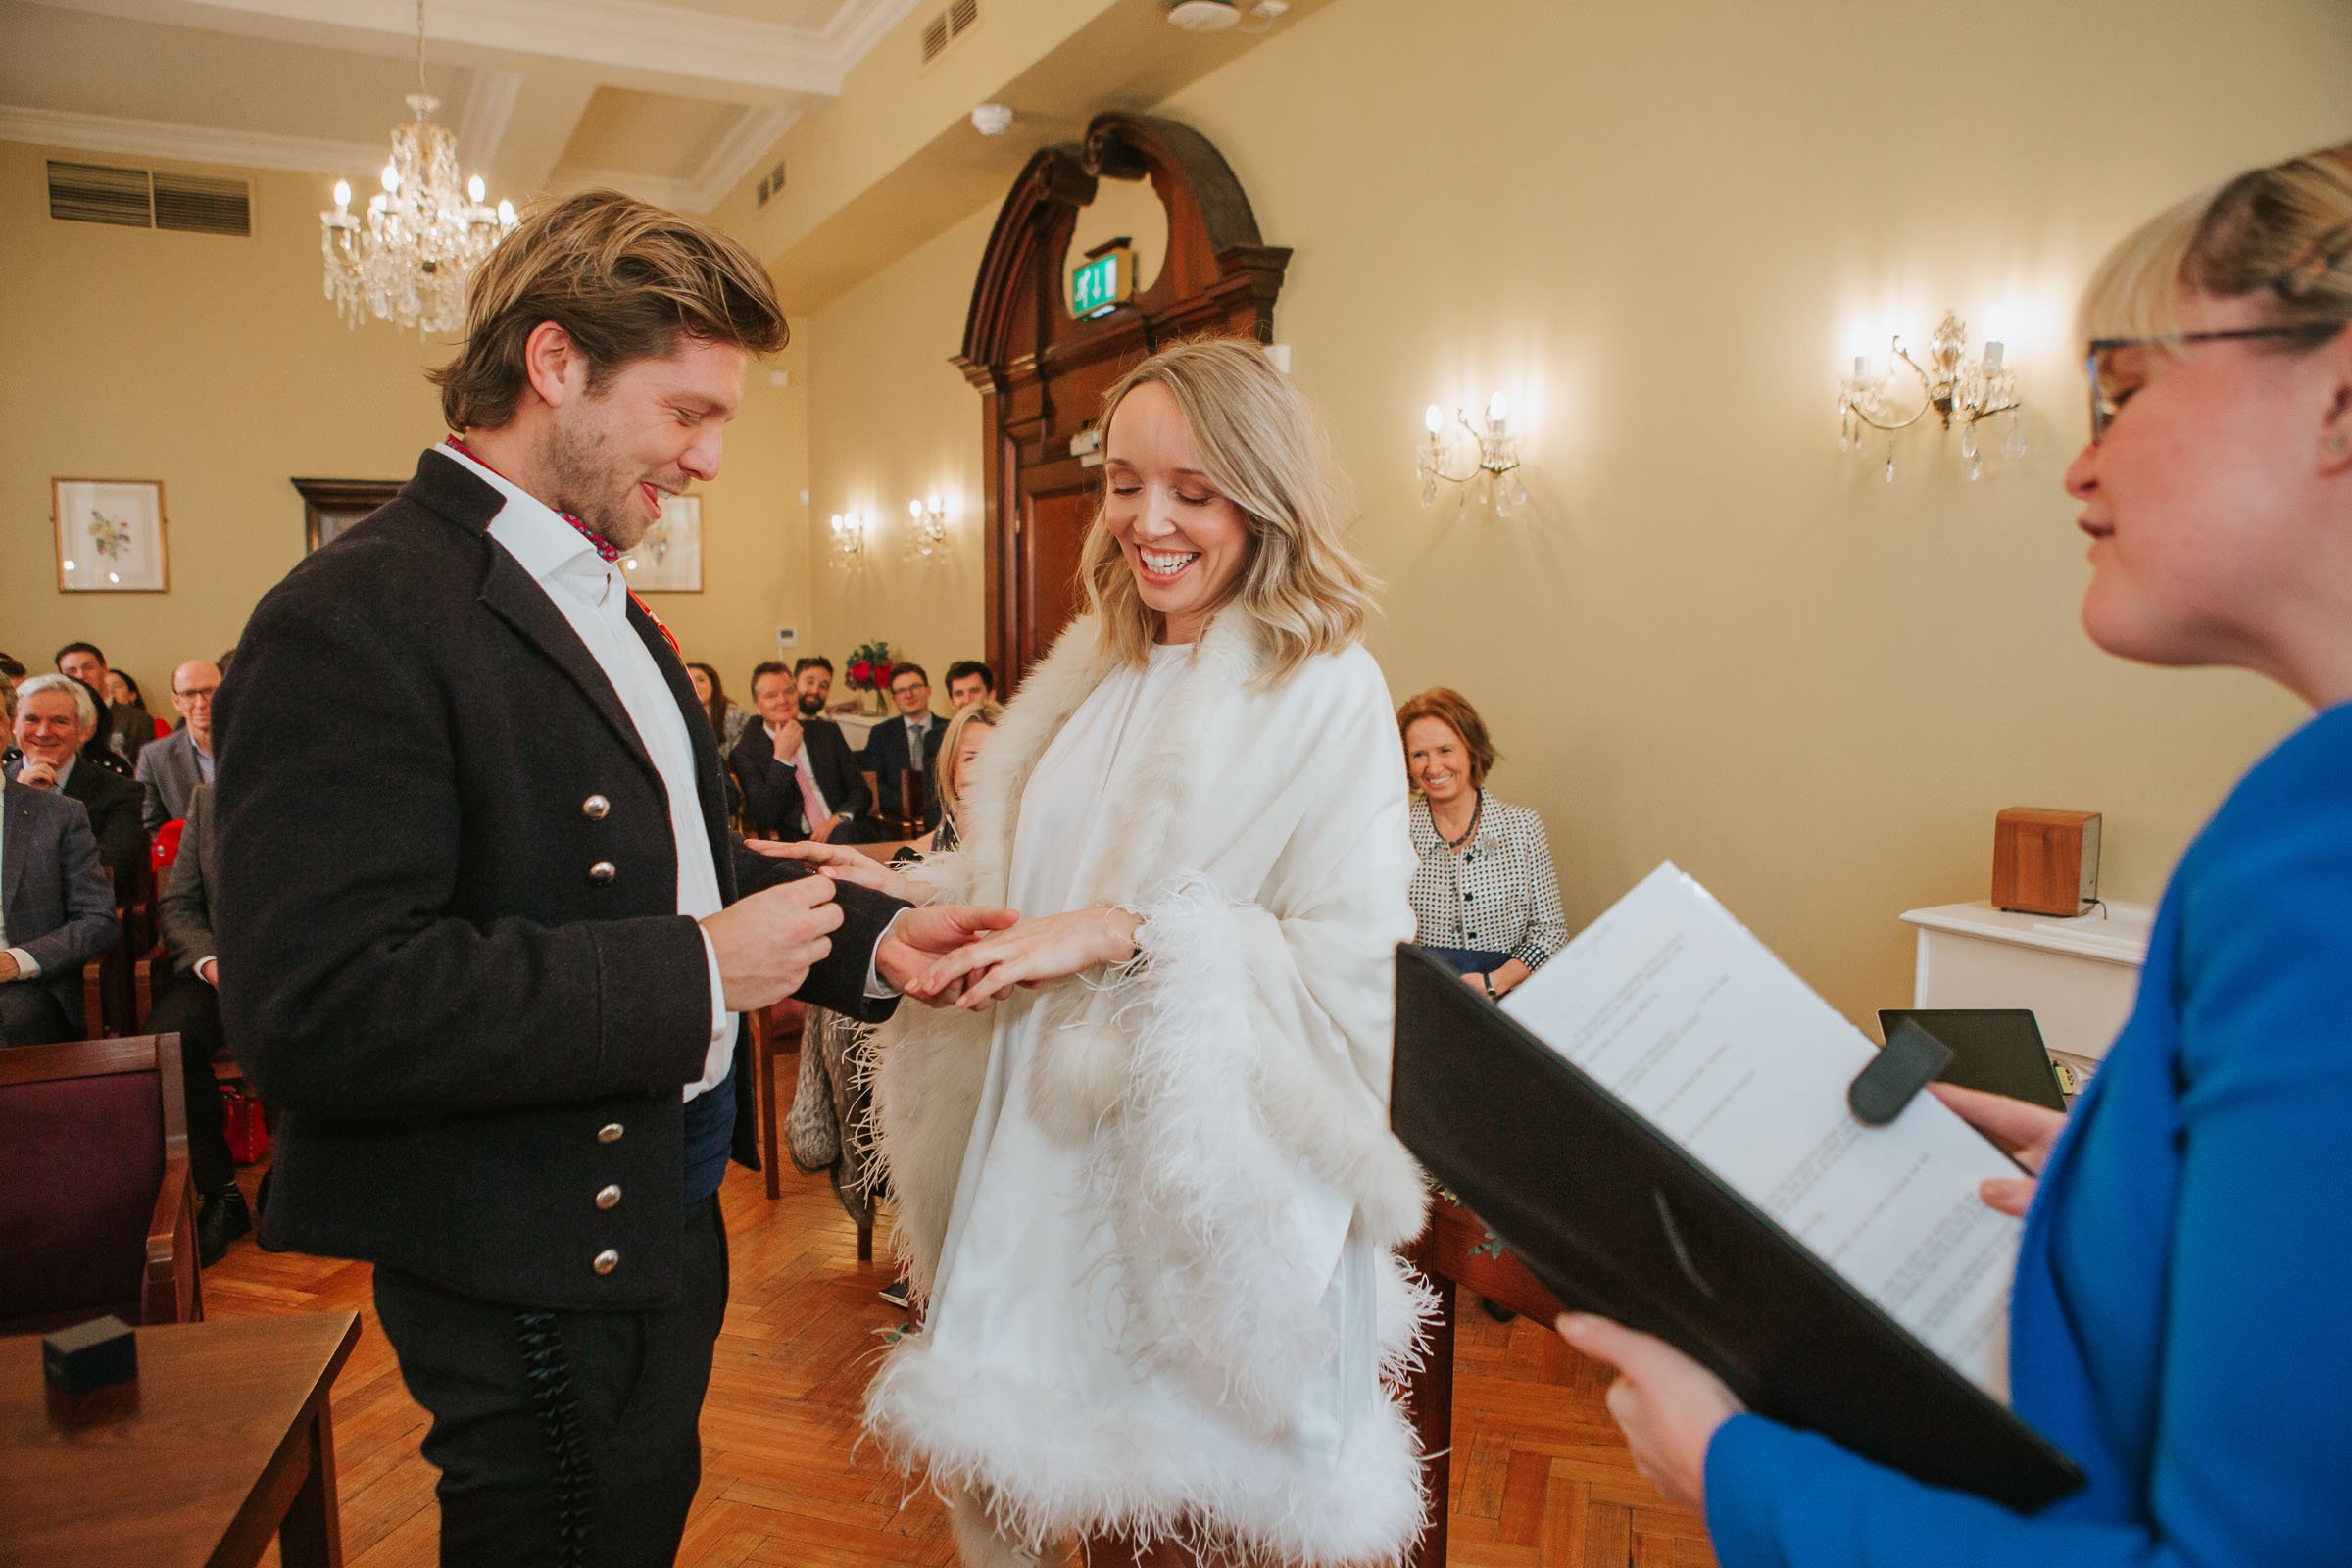  Lizzie and Max exchanging wedding rings in their wedding ceremony in front of their friends and family in The Byron Room at Chelsea Old Town Hall.  